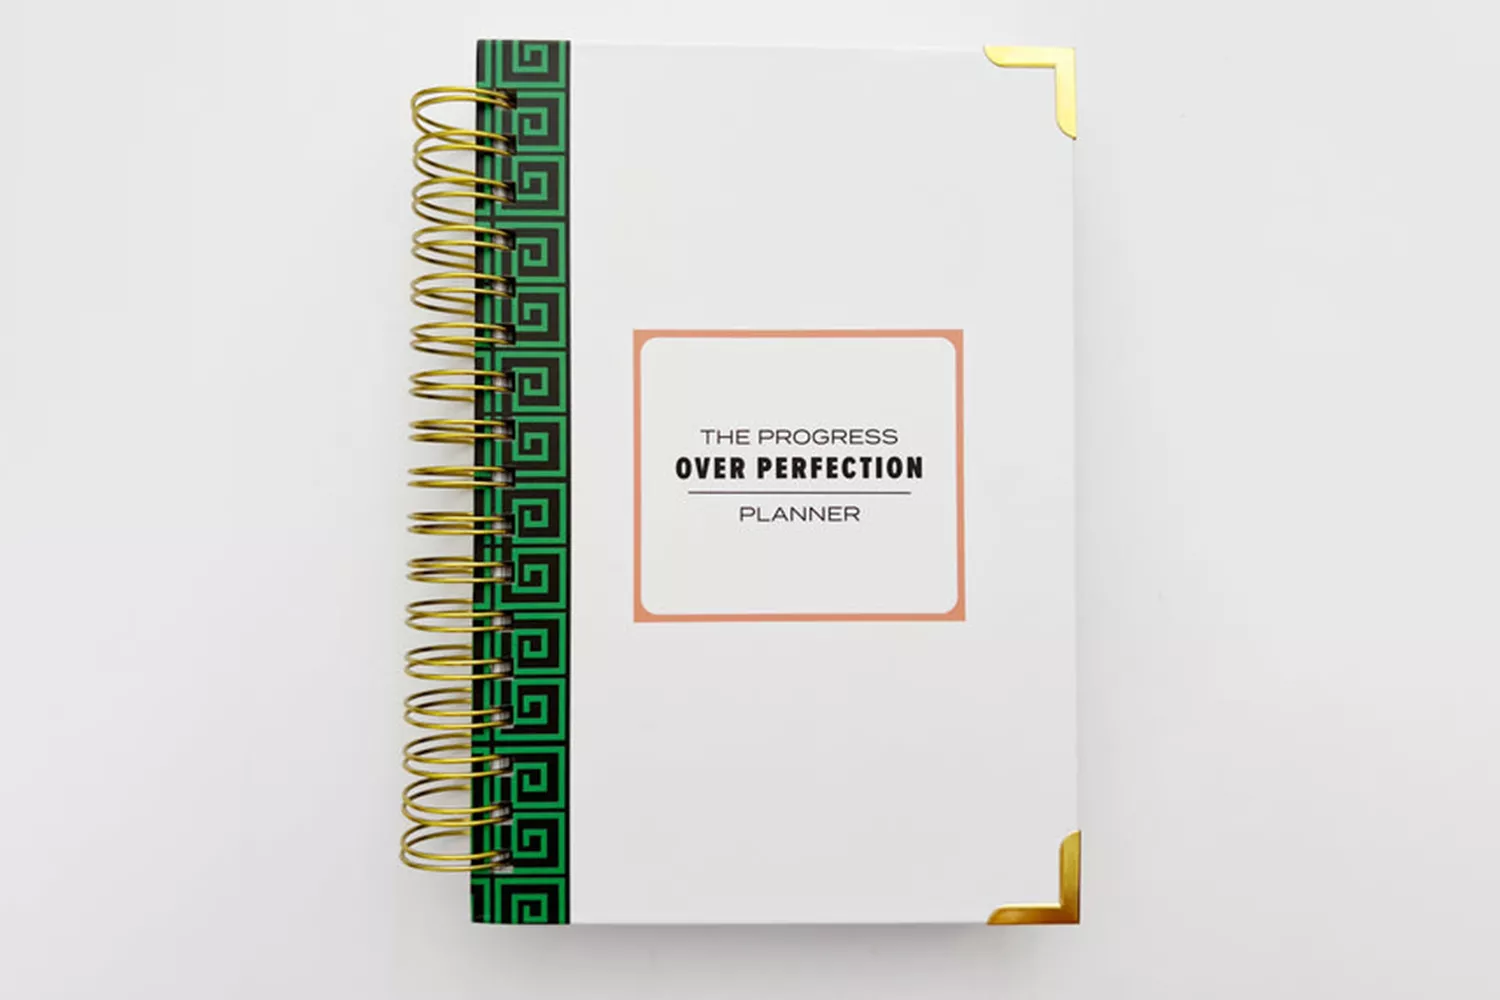 The Progress Over Perfection Planner